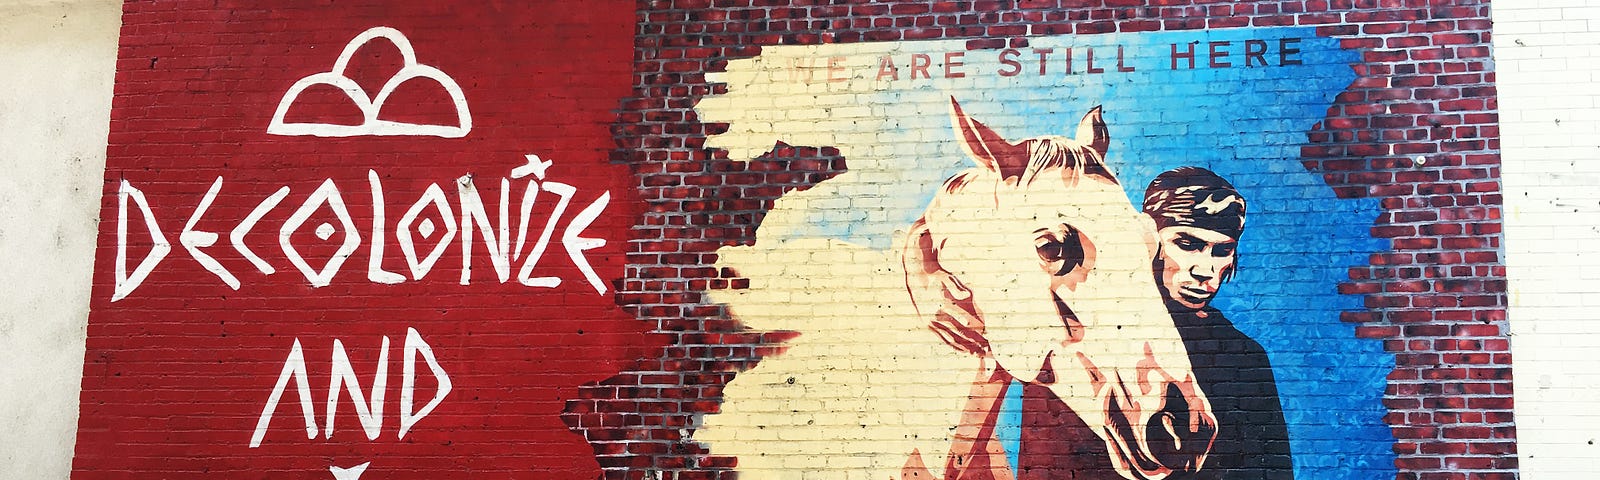 A mural painted on a brick wall depicting a man leading a white horse. The phrase “we are still here” is written above the mural, while the phrase “Decolonize and Chill” is written next to it.